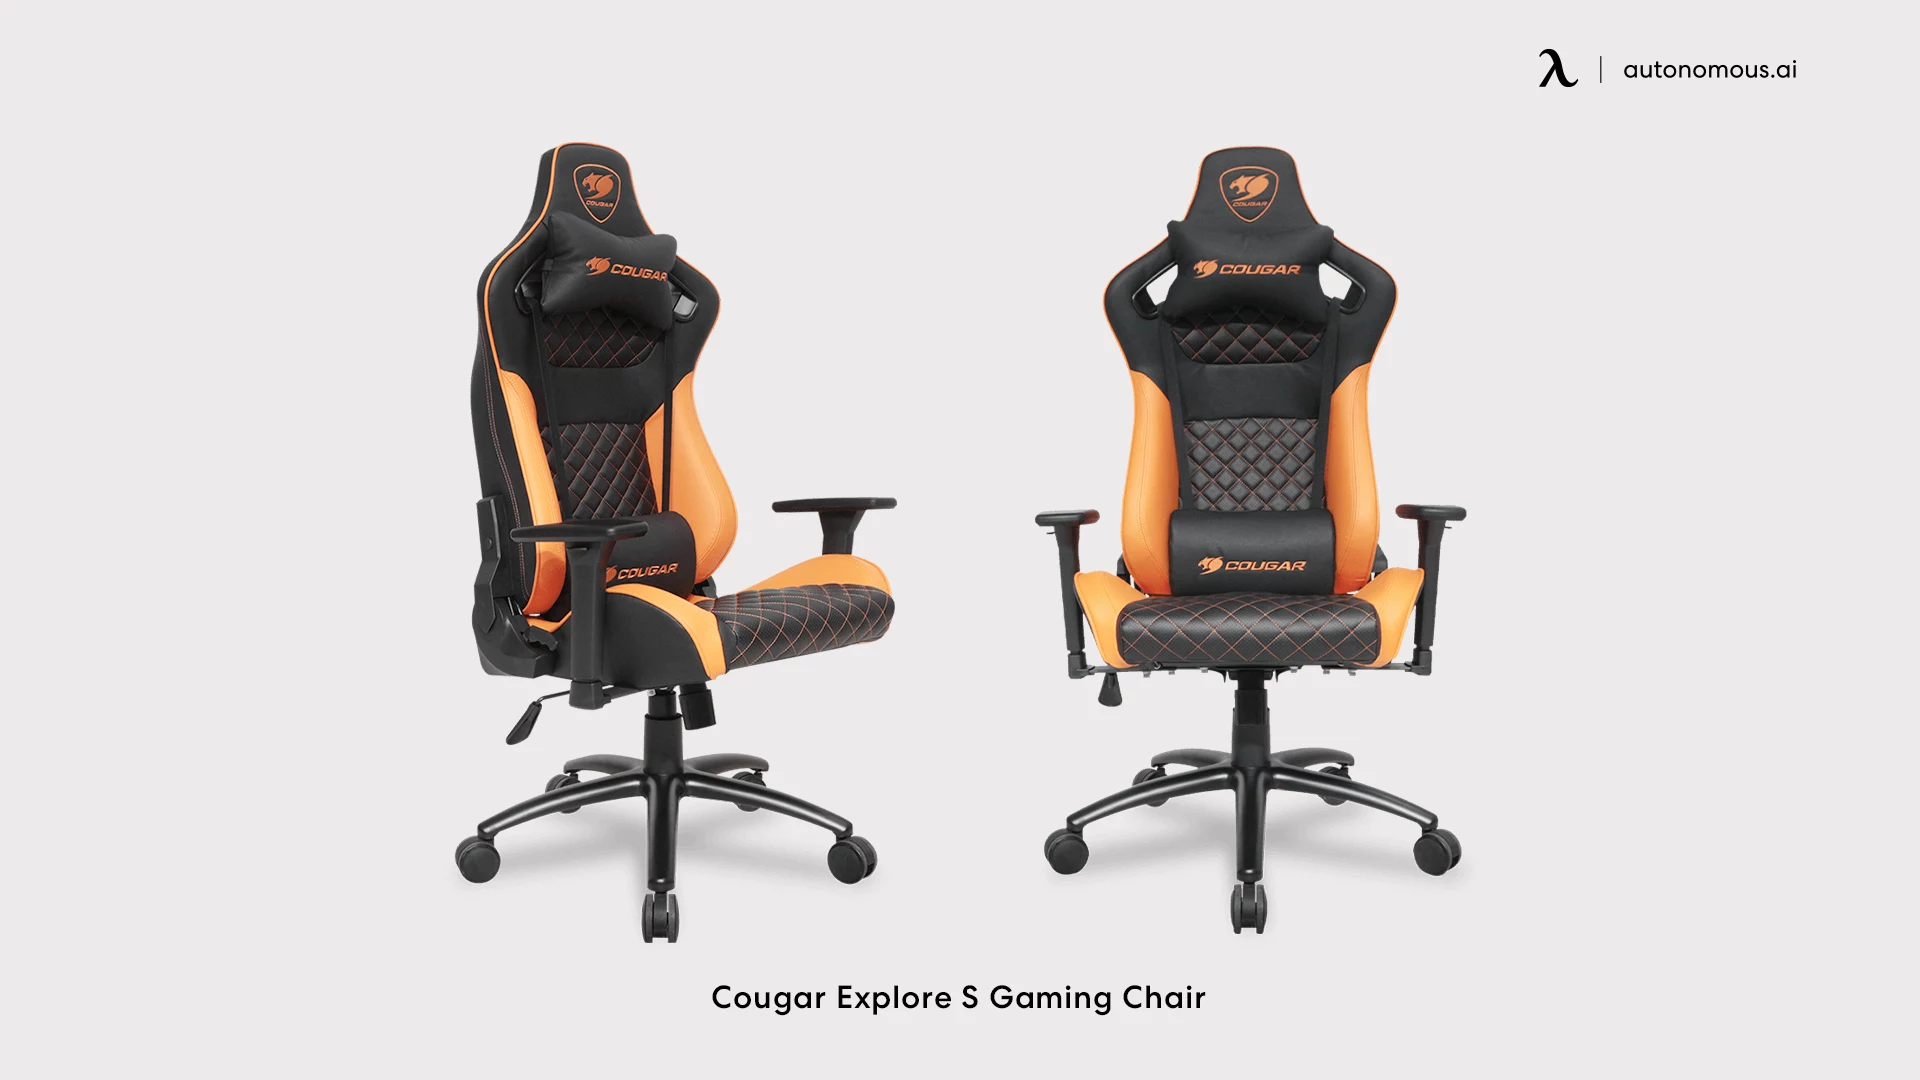 Cougar Explore S gray gaming chair